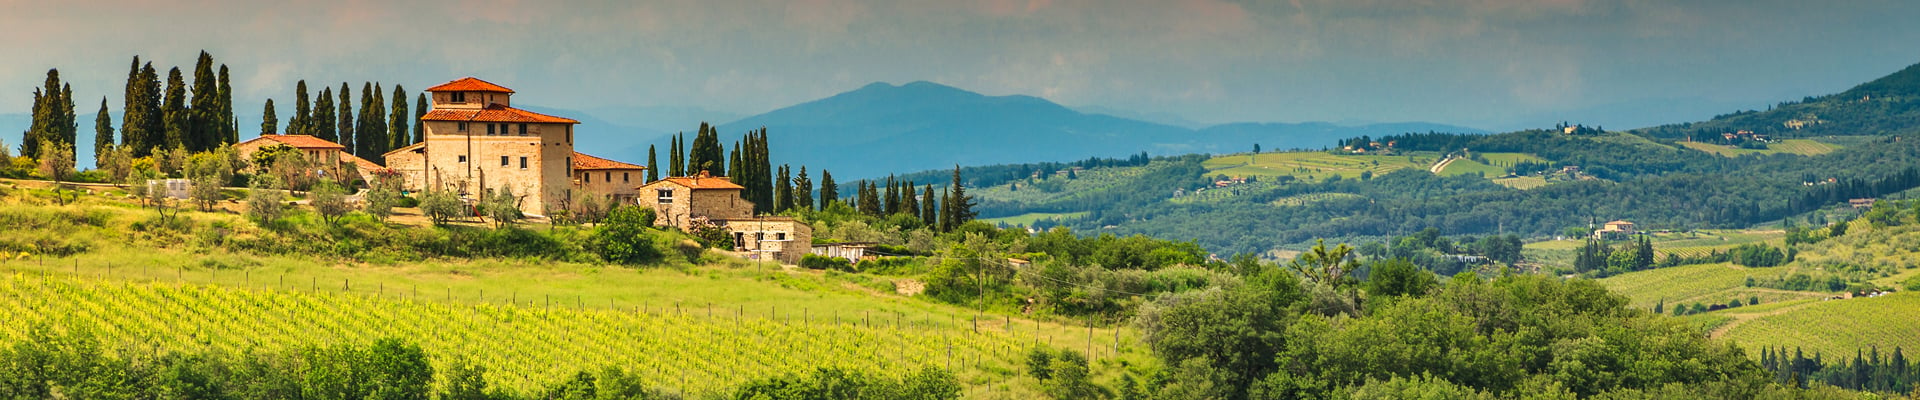 Italy's Chianti Region South of Florence